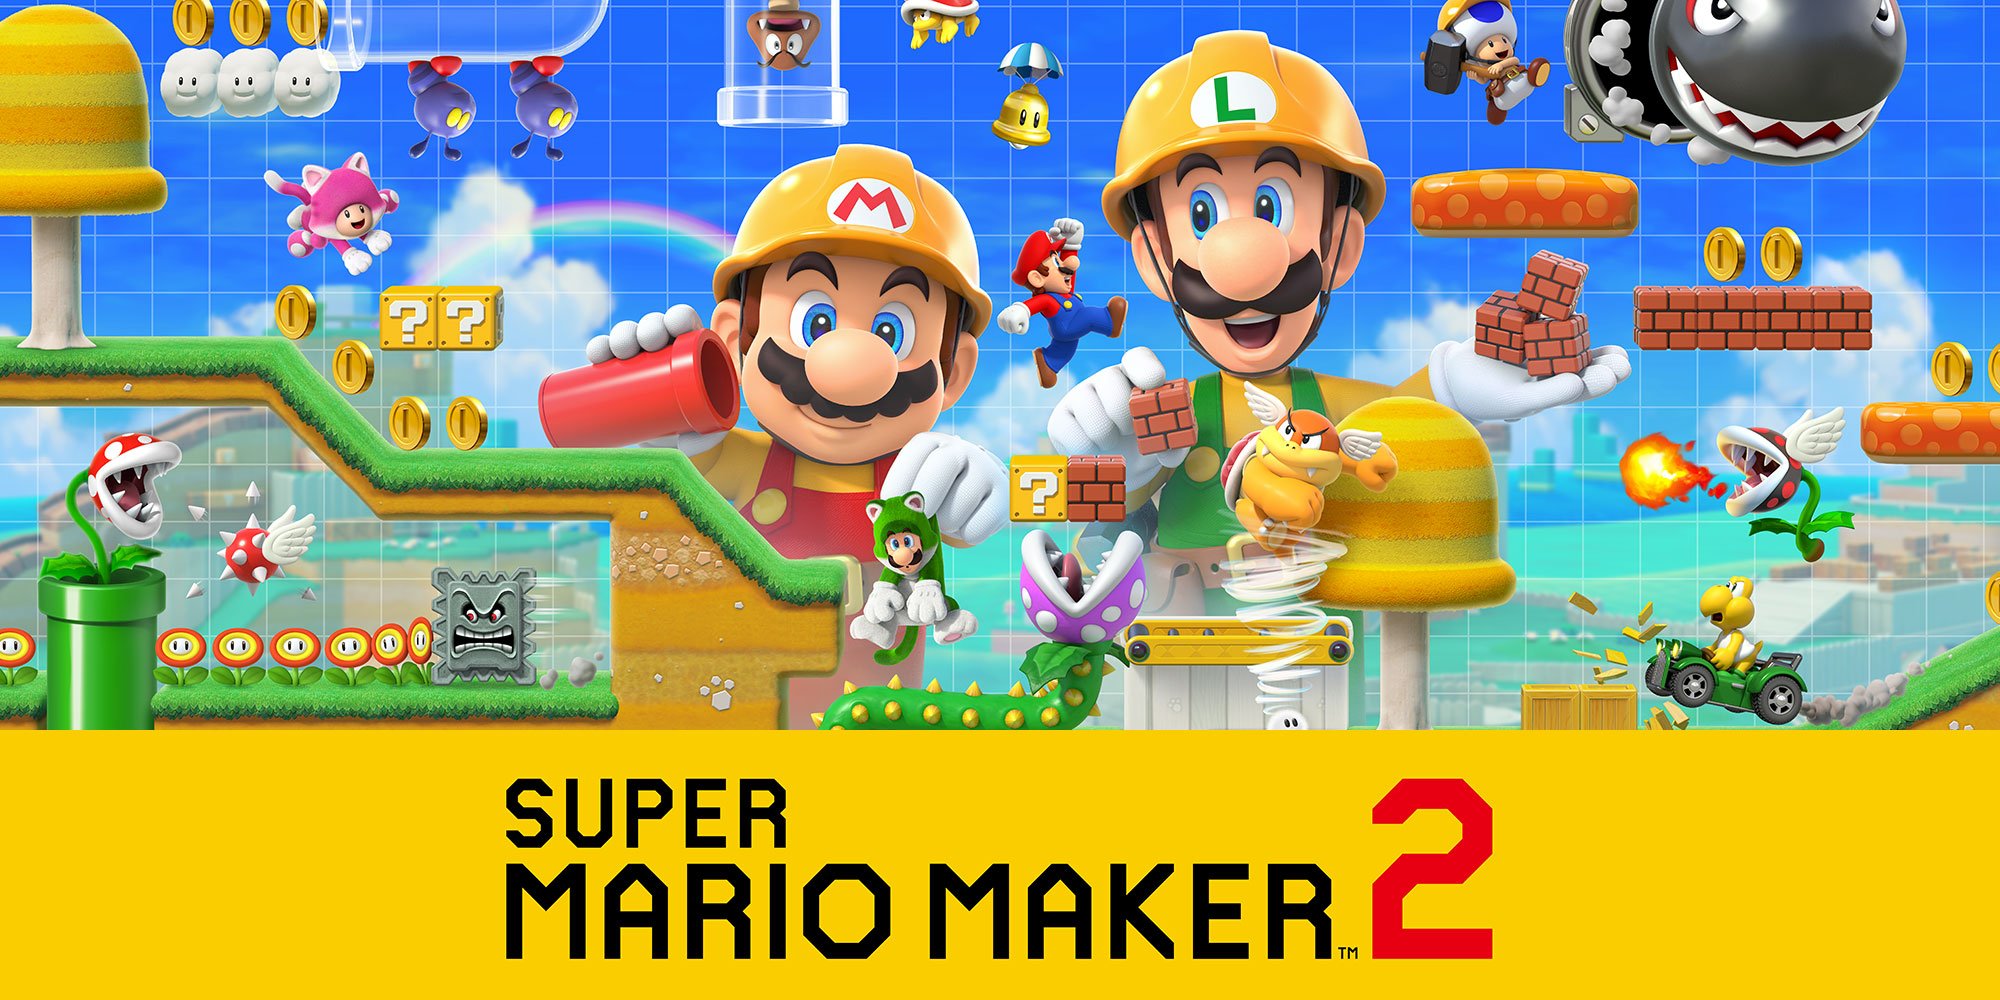 New super mario maker 2 na bgs 2019 | h2x1 nswitch supermariomaker2 1 | mario golf | mario maker 2 mario golf